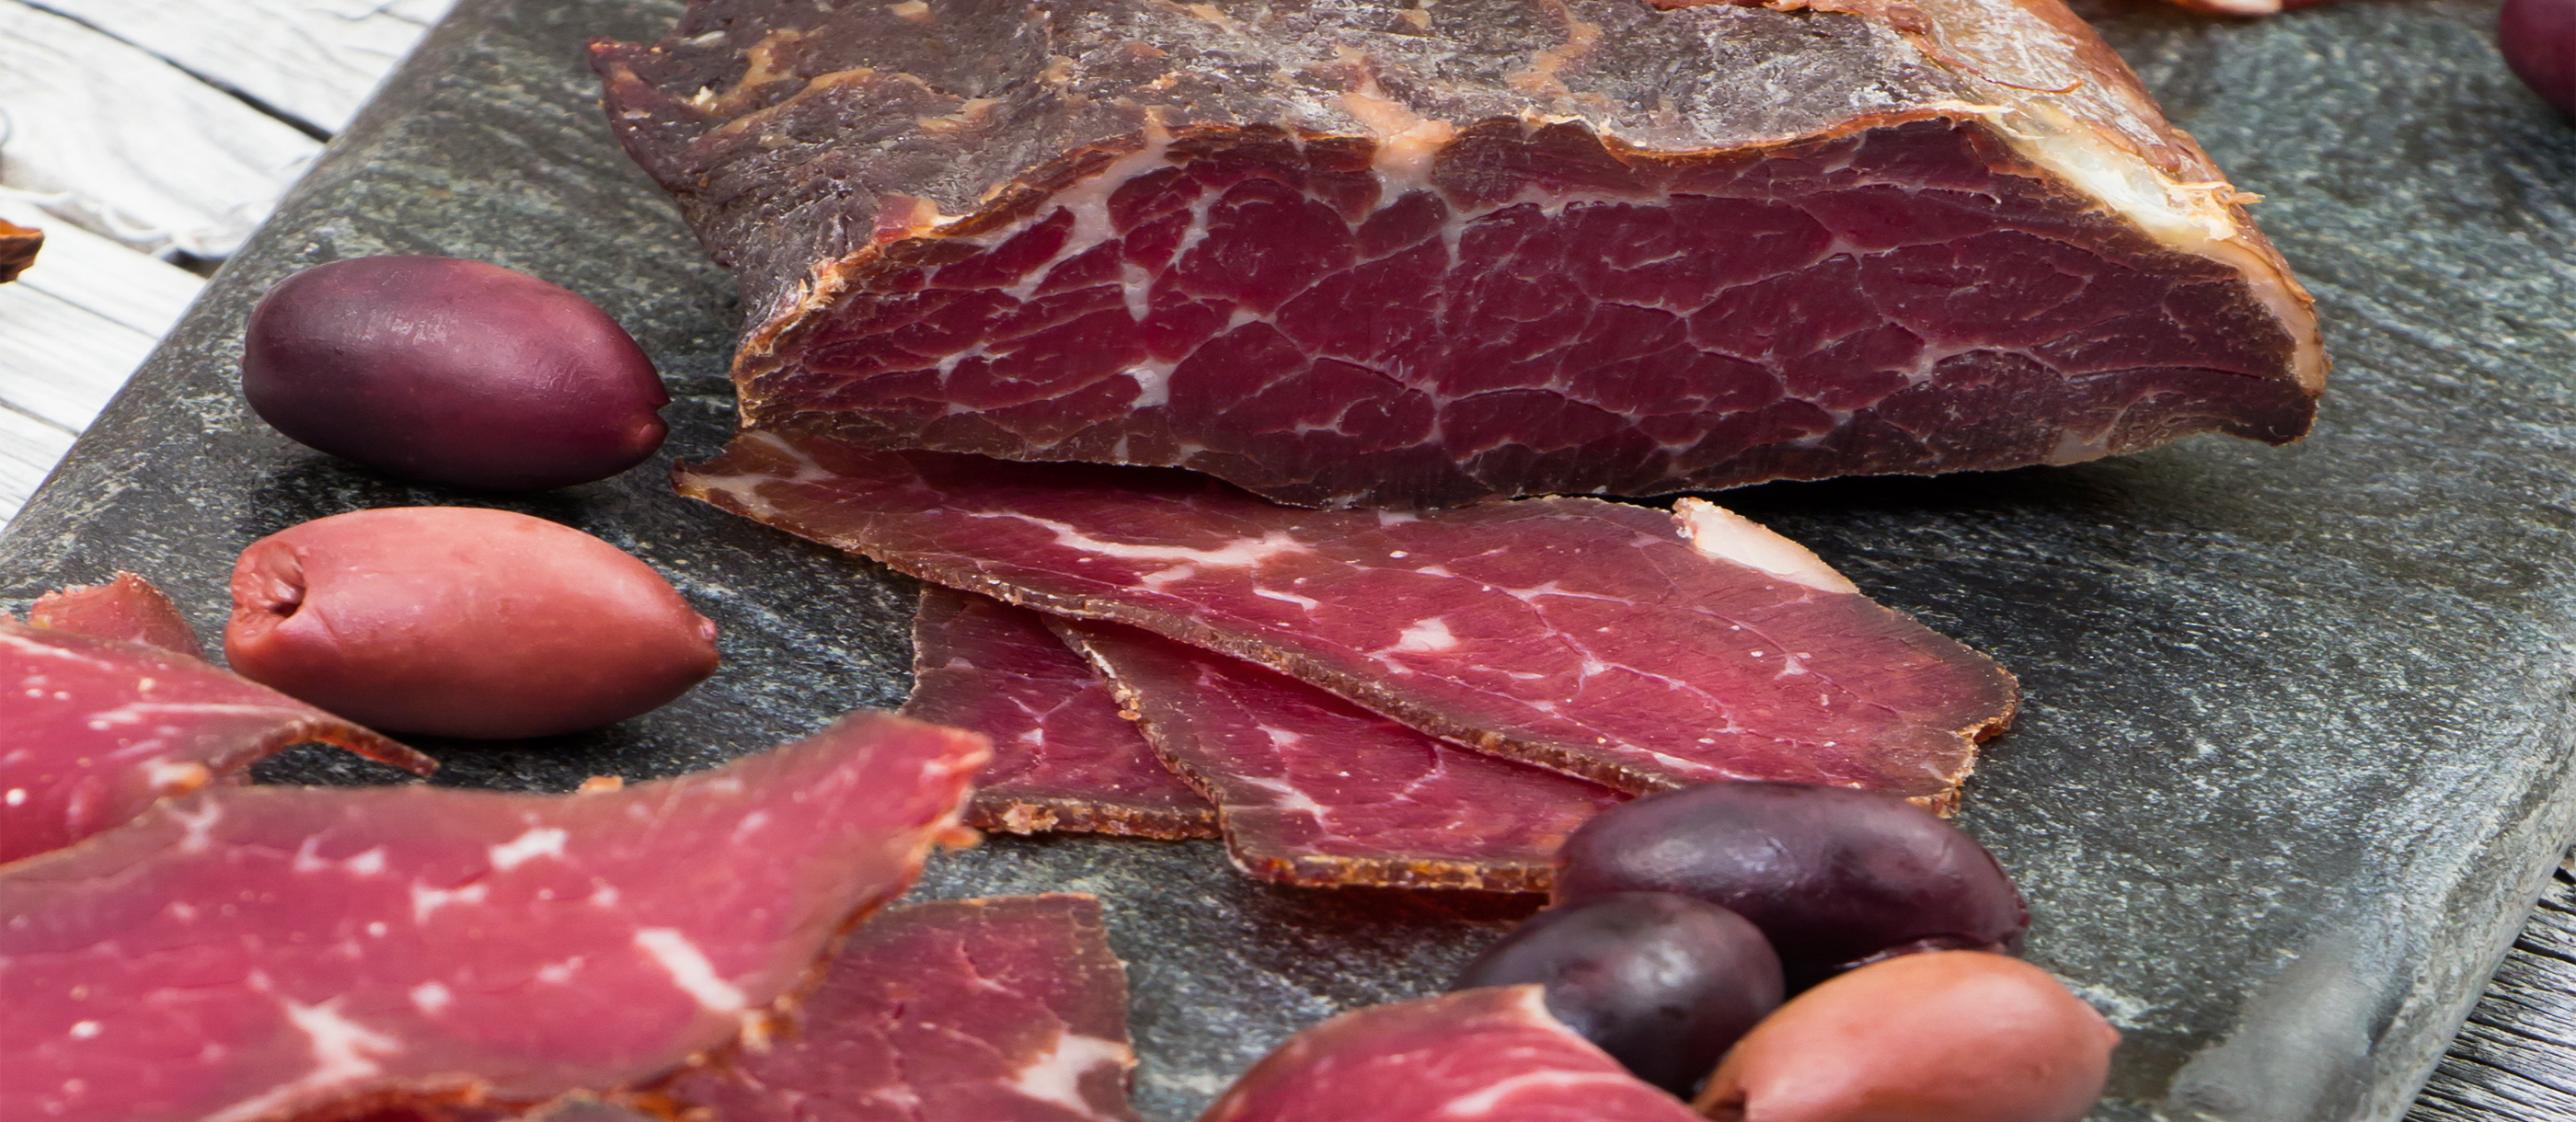 8 Best Rated Southeastern European Cured Meats.